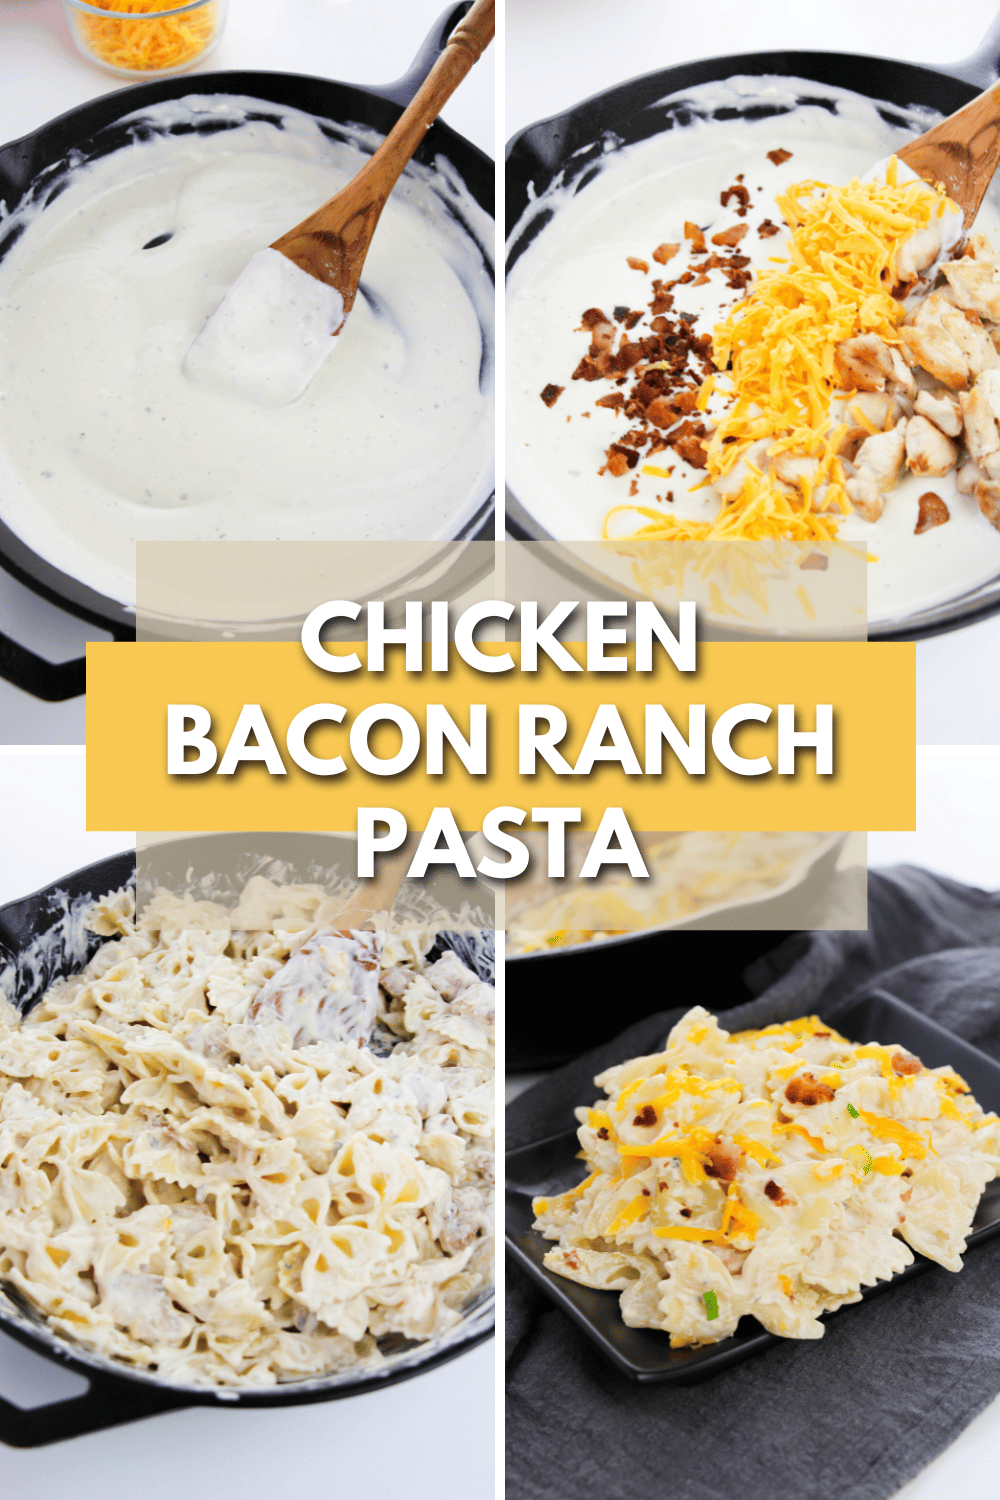 This Chicken Bacon Ranch Pasta is an easy and delicious recipe that can be made in no time at all with only a little bit of effort. #chickenbaconranchpasta #chicken #bacon #ranch #pasta via @wondermomwannab